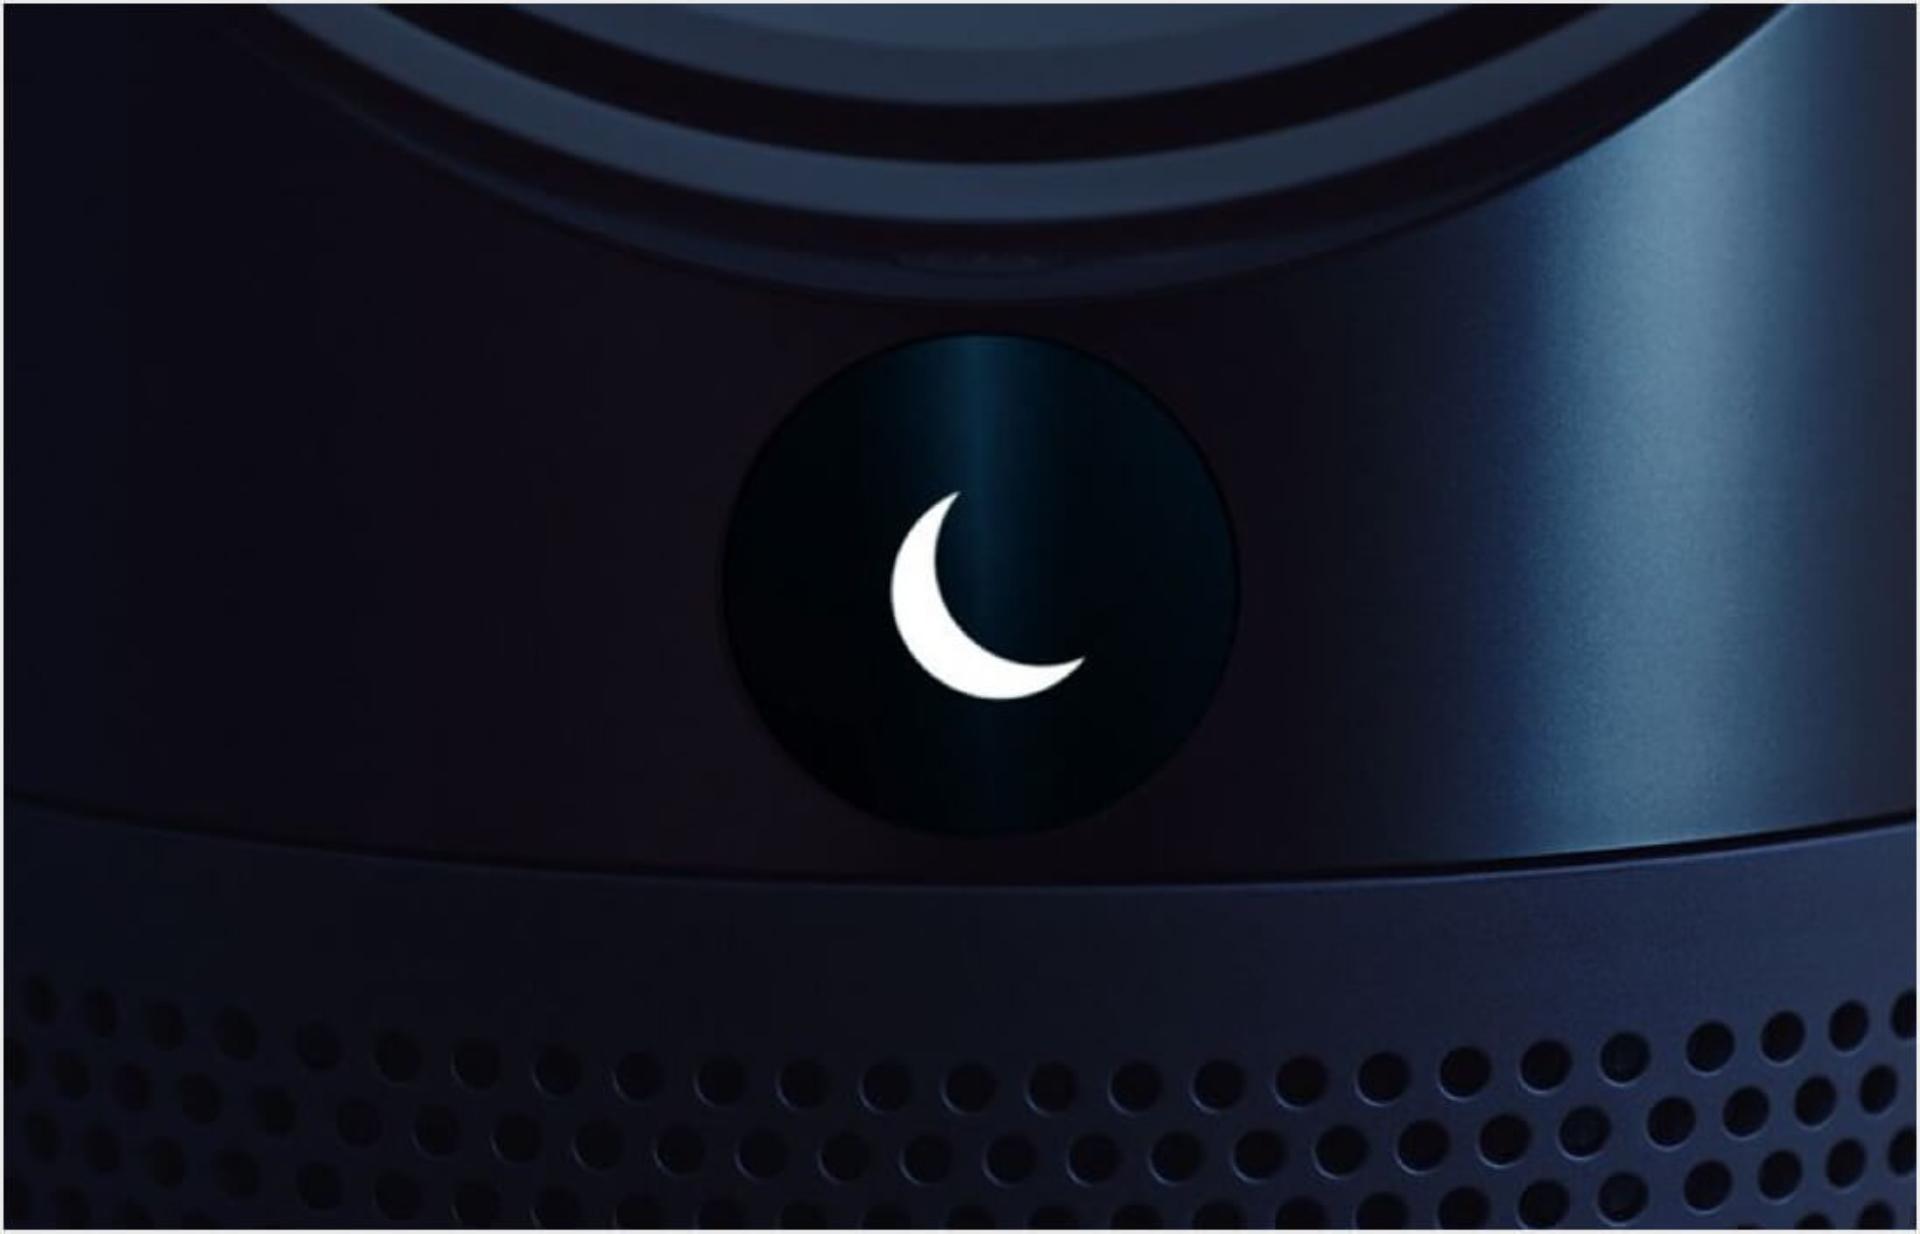 The Dyson Pure Cool Cryptomic air purifier in Night mode 